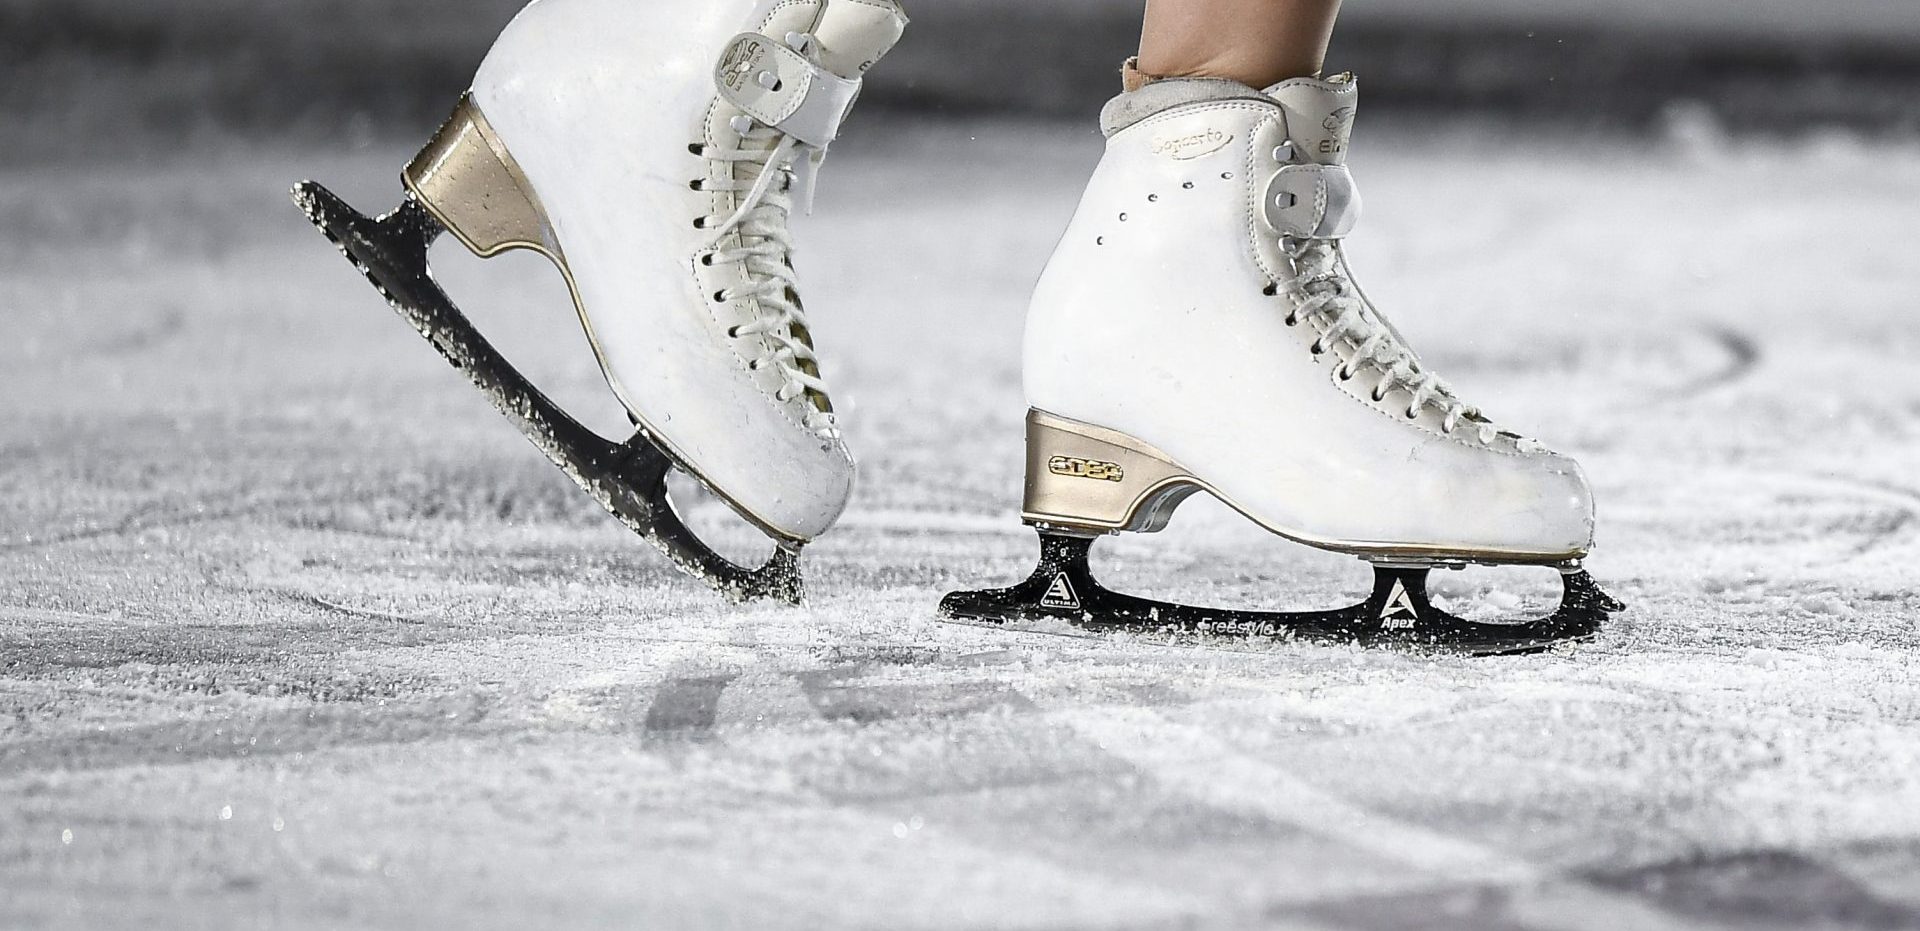 Howard University Becomes First HBCU With An Ice Skating Team